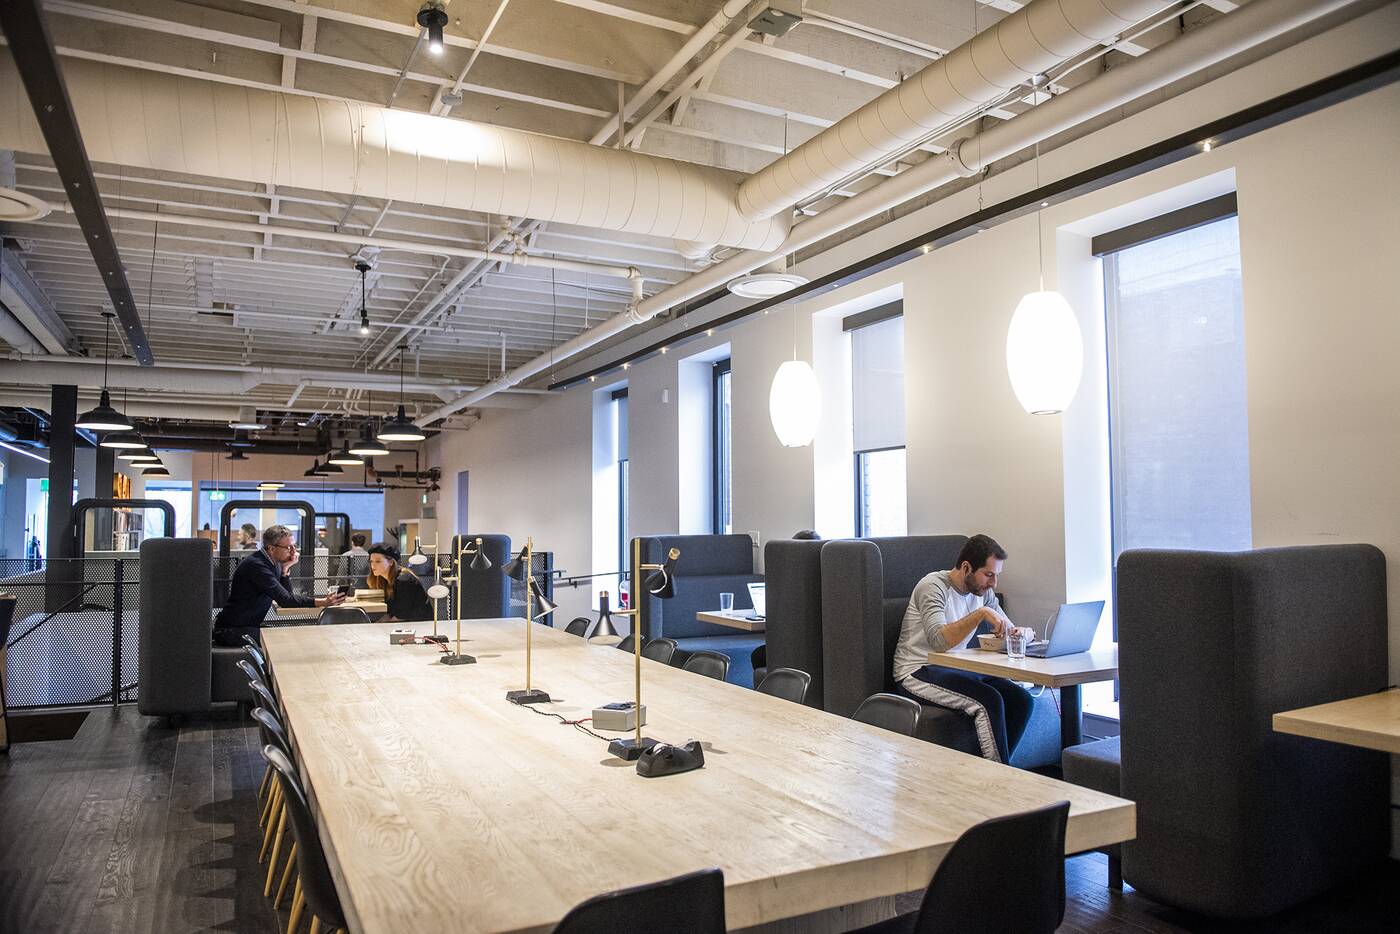 Toronto now has a coworking space for musicians and creative types